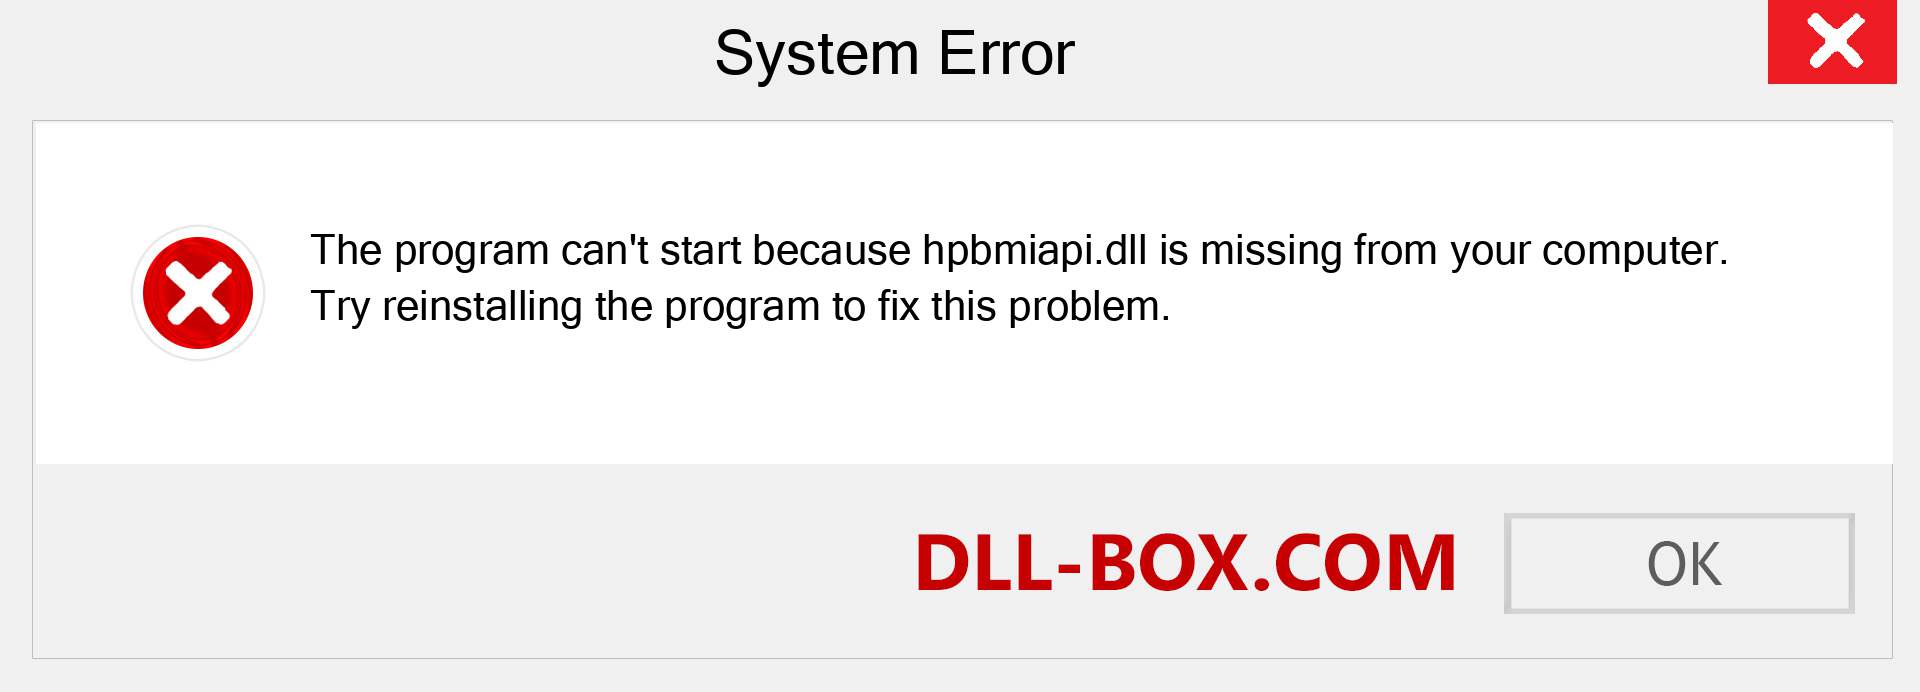  hpbmiapi.dll file is missing?. Download for Windows 7, 8, 10 - Fix  hpbmiapi dll Missing Error on Windows, photos, images